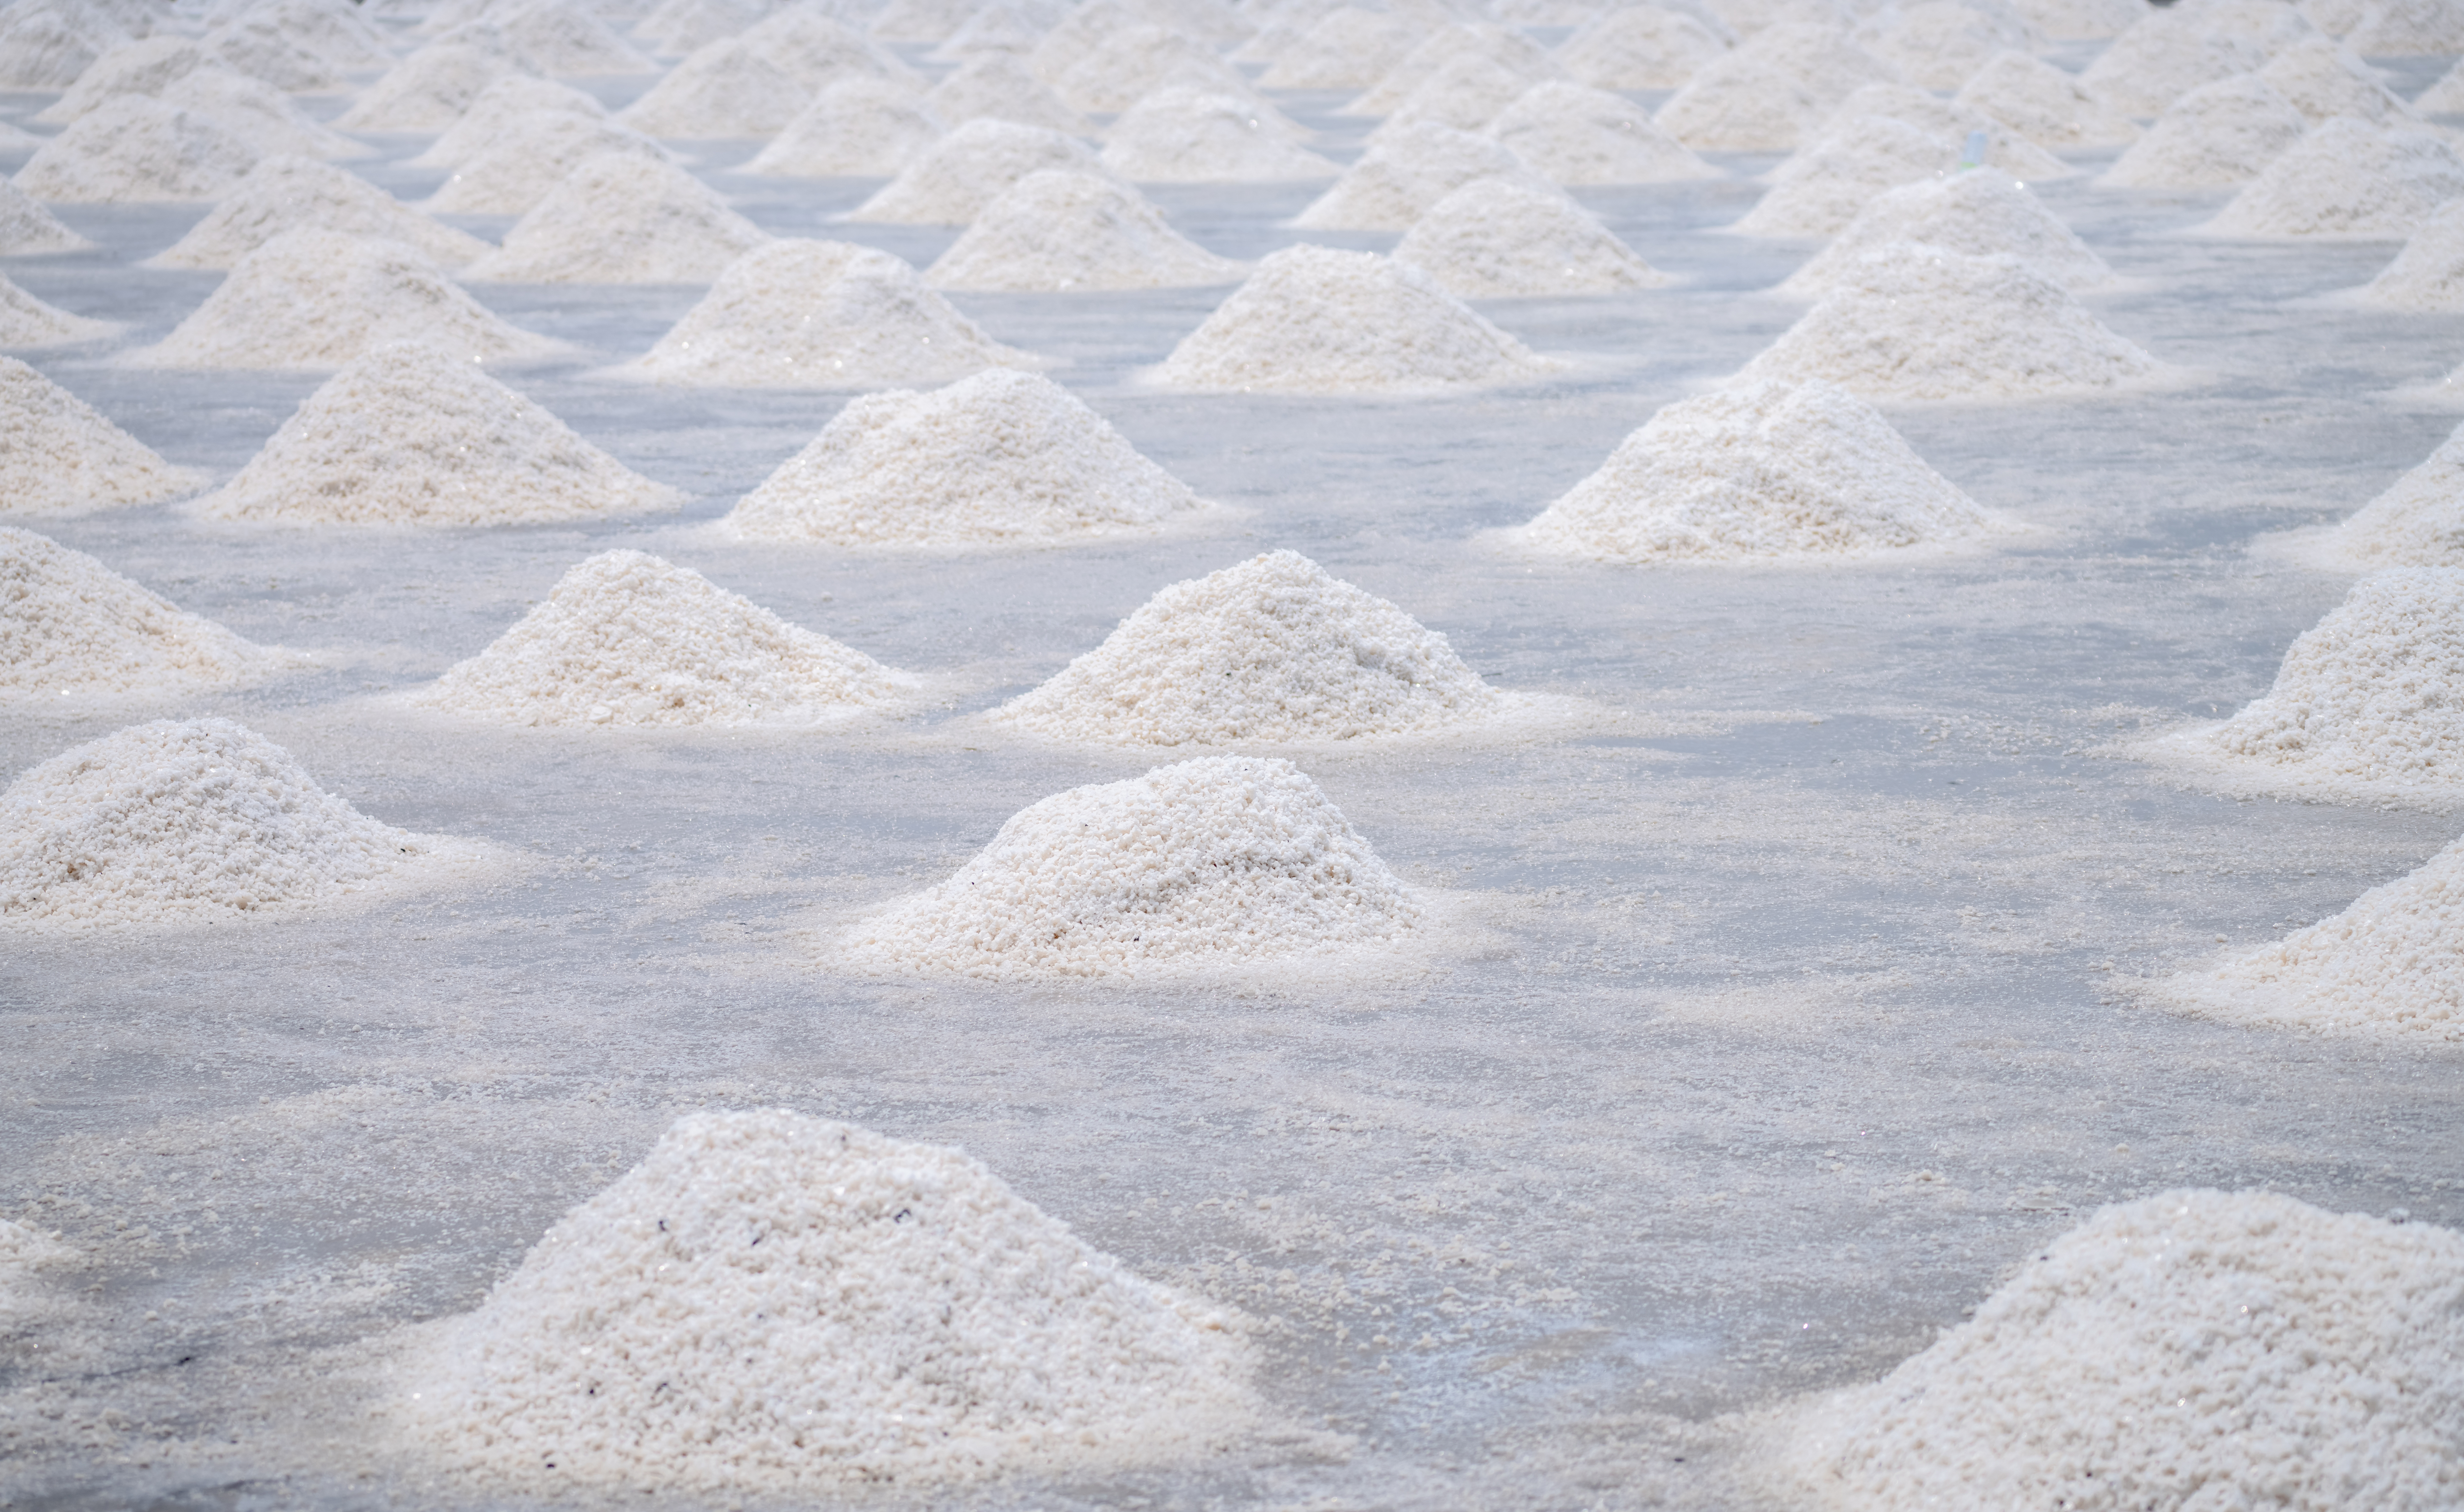 Pros and Cons of Using Salt Brine as a Snow Removal Method